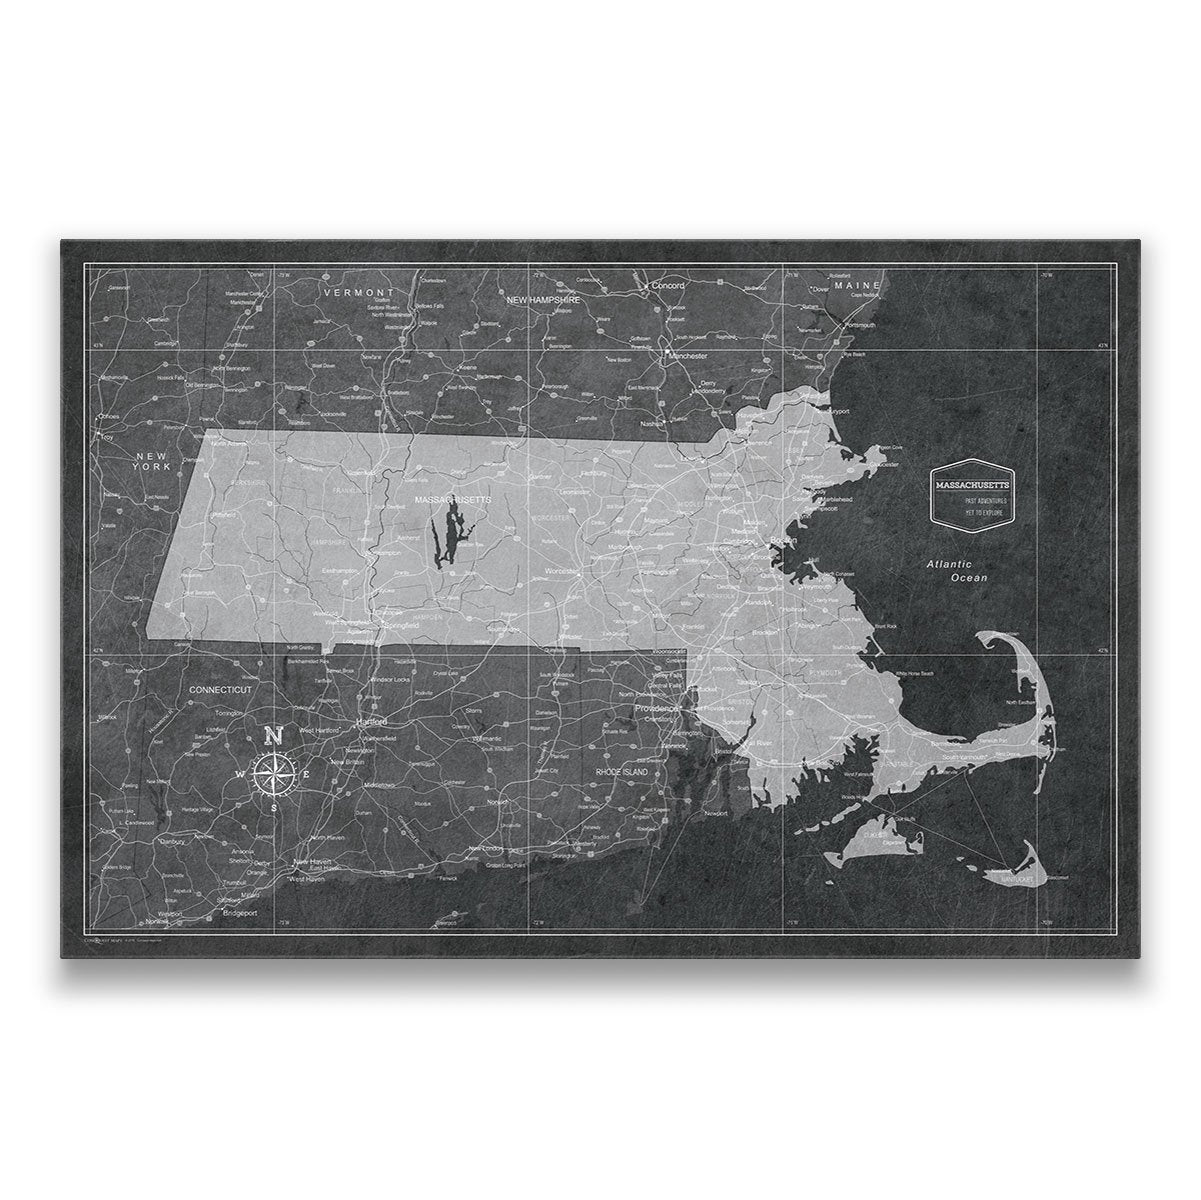 Travel in Style with a Massachusetts Wall Map